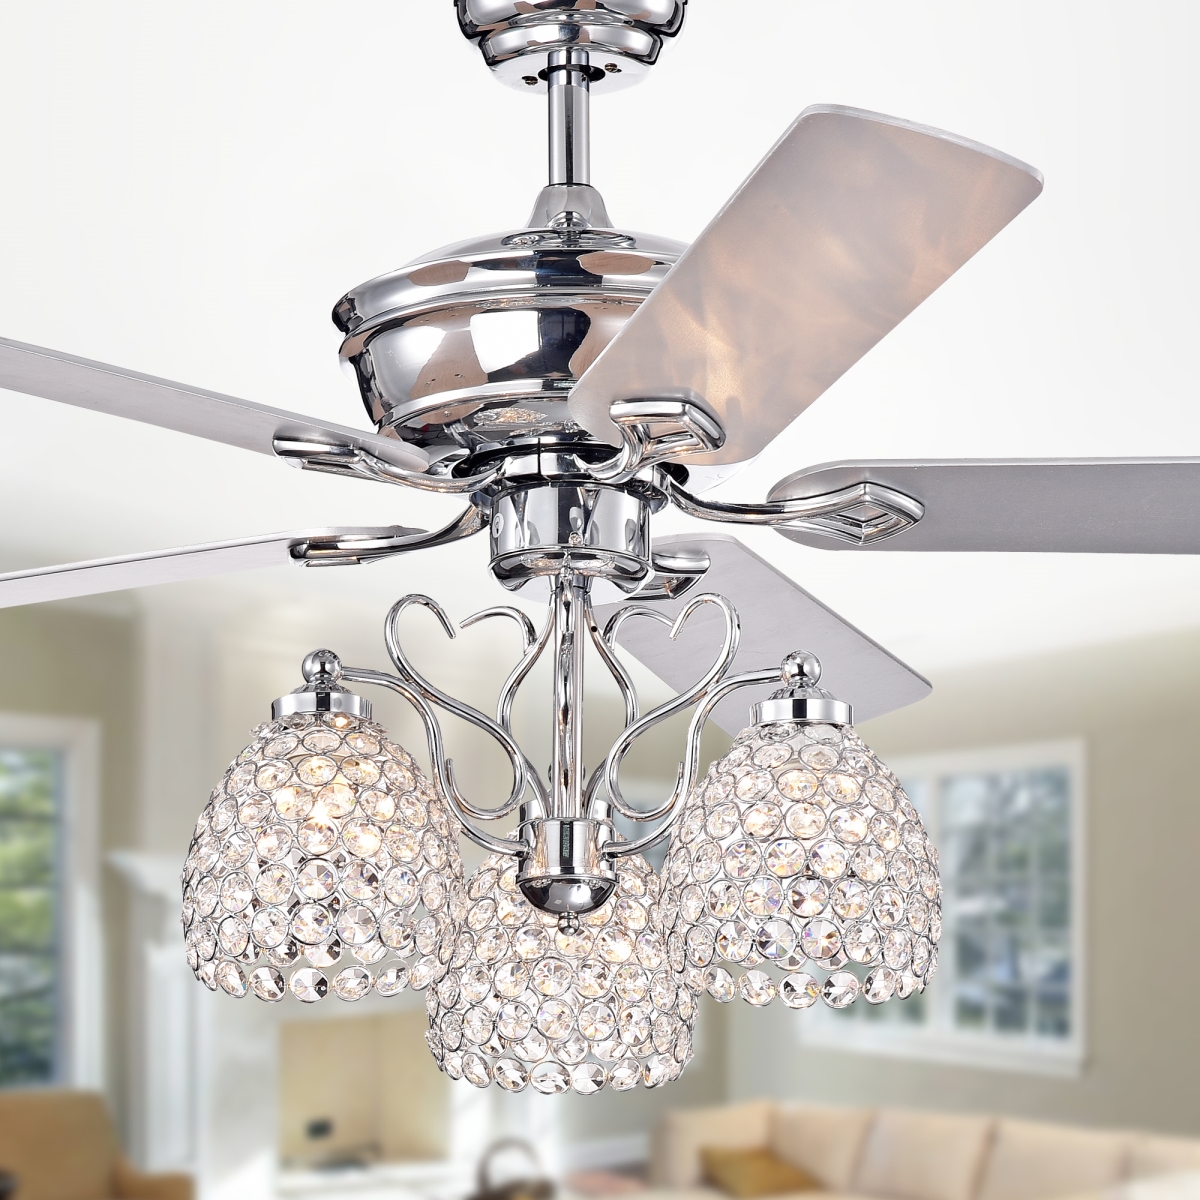 Cfl-8419remo-ch 52 In. Boffen 3-light Lighted Ceiling Fan With Crystal Cup Shades, Chrome